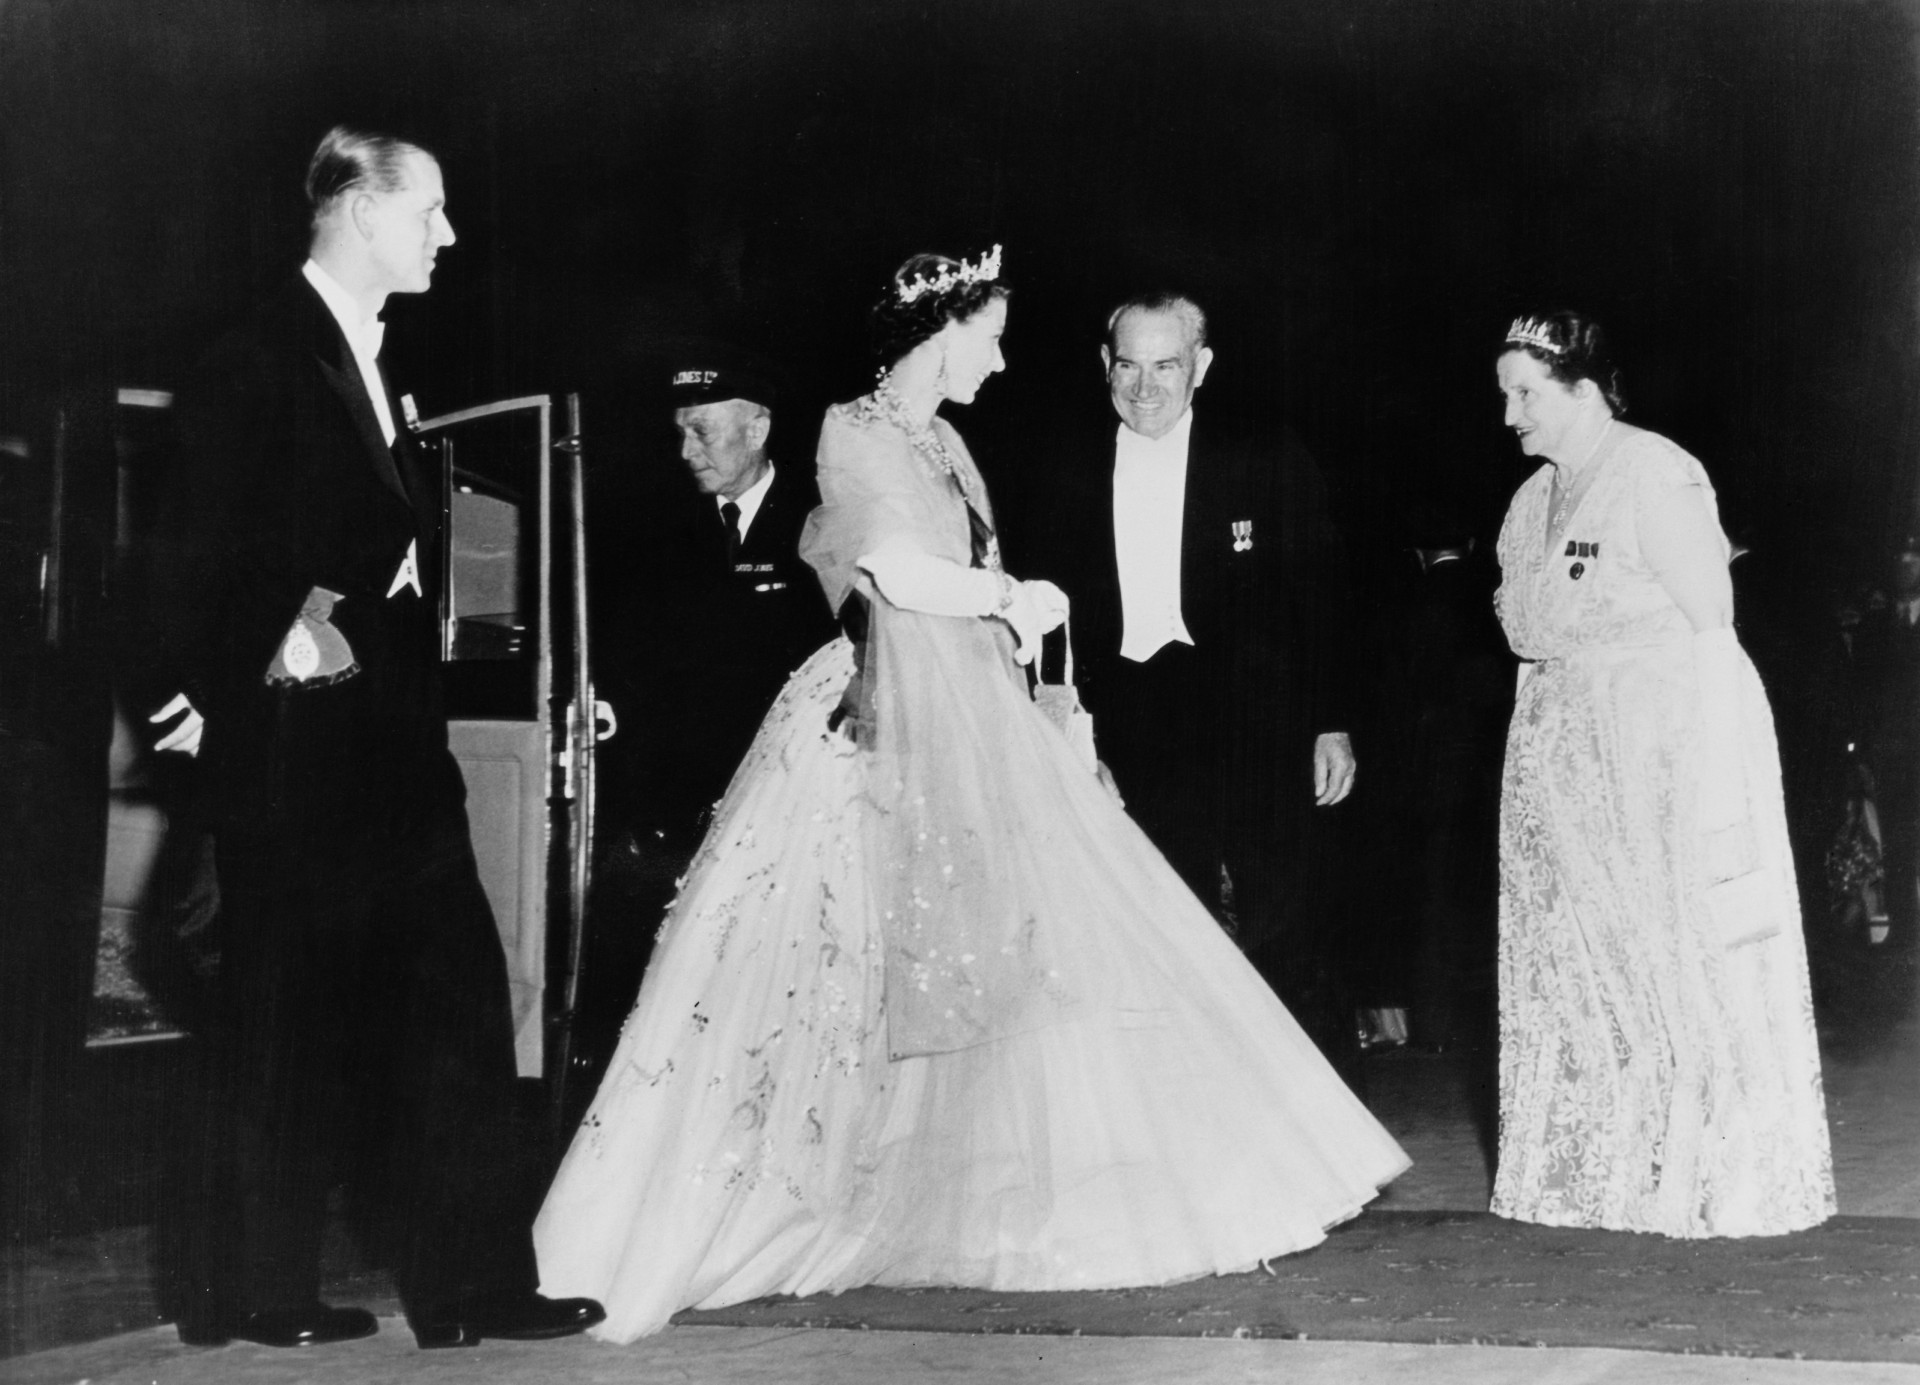 The royals are greeted by Premier of New South Wales Joseph Cahill and his wife, Esmey, before a state banquet in Sydney.<p><a href="https://www.msn.com/en-nz/community/channel/vid-7xx8mnucu55yw63we9va2gwr7uihbxwc68fxqp25x6tg4ftibpra?cvid=94631541bc0f4f89bfd59158d696ad7e">Follow us and access great exclusive content every day</a></p>